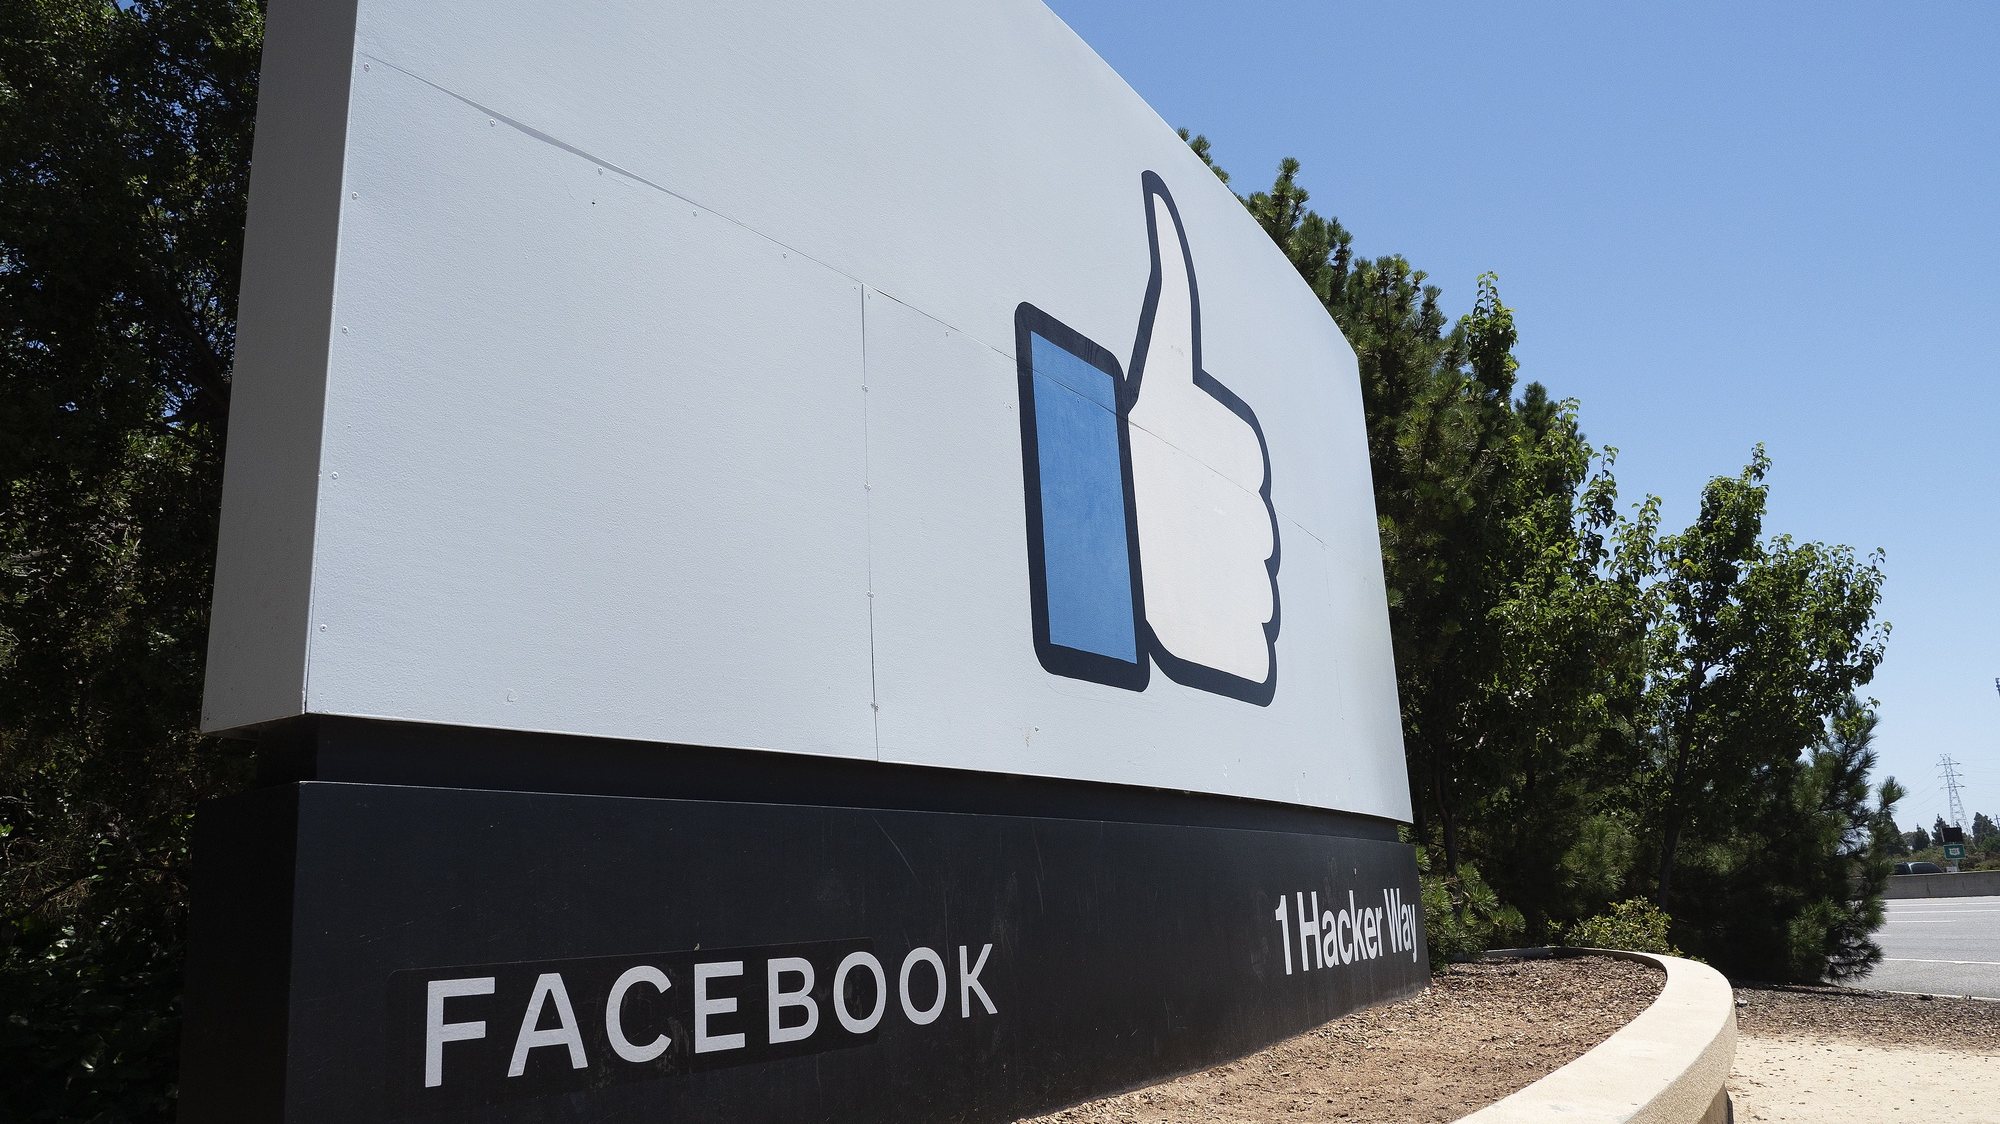 epa08516890 A view of the iconic Facebook thumbs up &#039;Like&#039; in Menlo Park, California, USA, 29 June 2020. The &#039;Stop Hate for Profit&#039; campaign is getting more advertisers to boycott Facebook with its handling of hate speech and misinformation.  EPA/JOHN G. MABANGLO